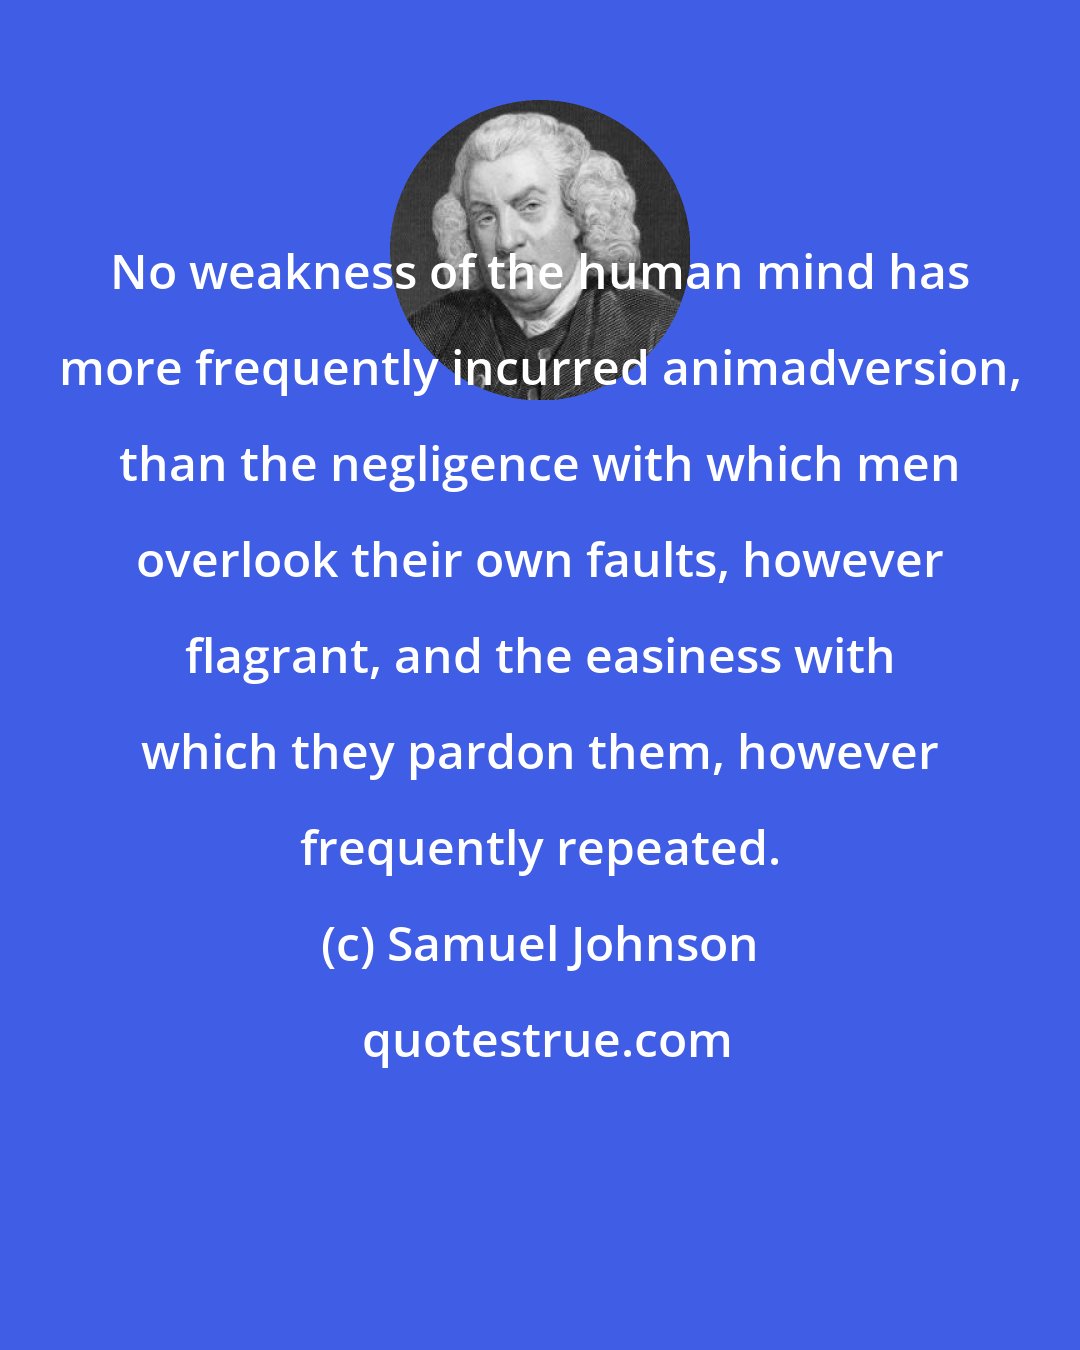 Samuel Johnson: No weakness of the human mind has more frequently incurred animadversion, than the negligence with which men overlook their own faults, however flagrant, and the easiness with which they pardon them, however frequently repeated.